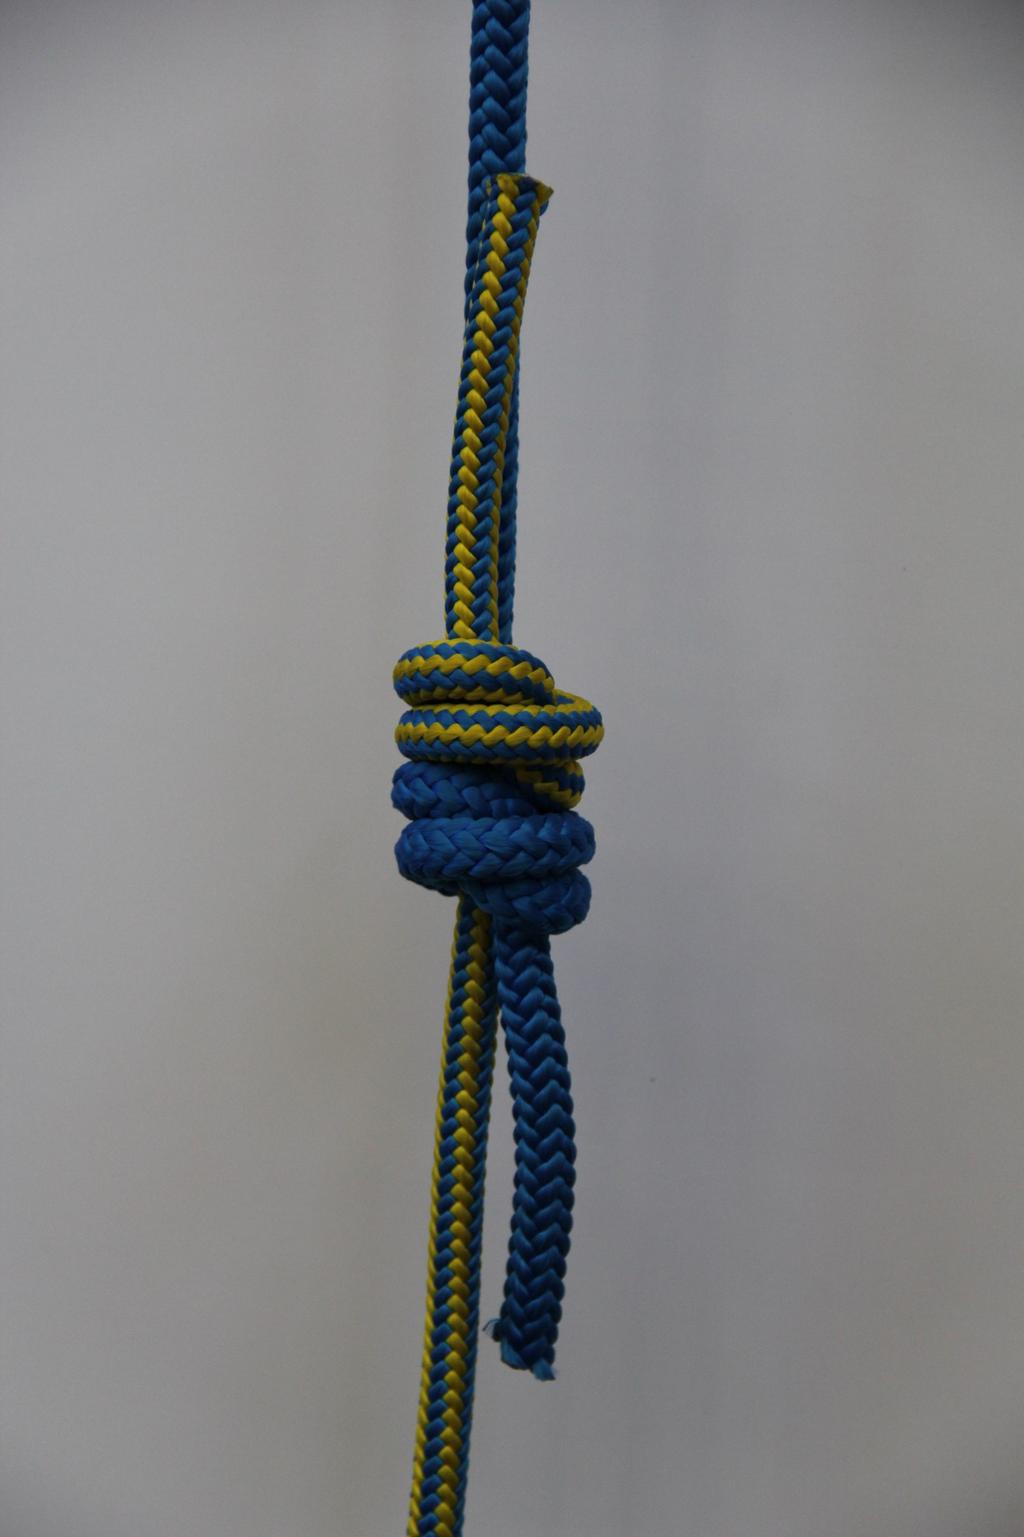 Double Fishermans knot aka Fishermans Bend: often used to make a Prusik loop, join two ropes together, or form a backup knot.